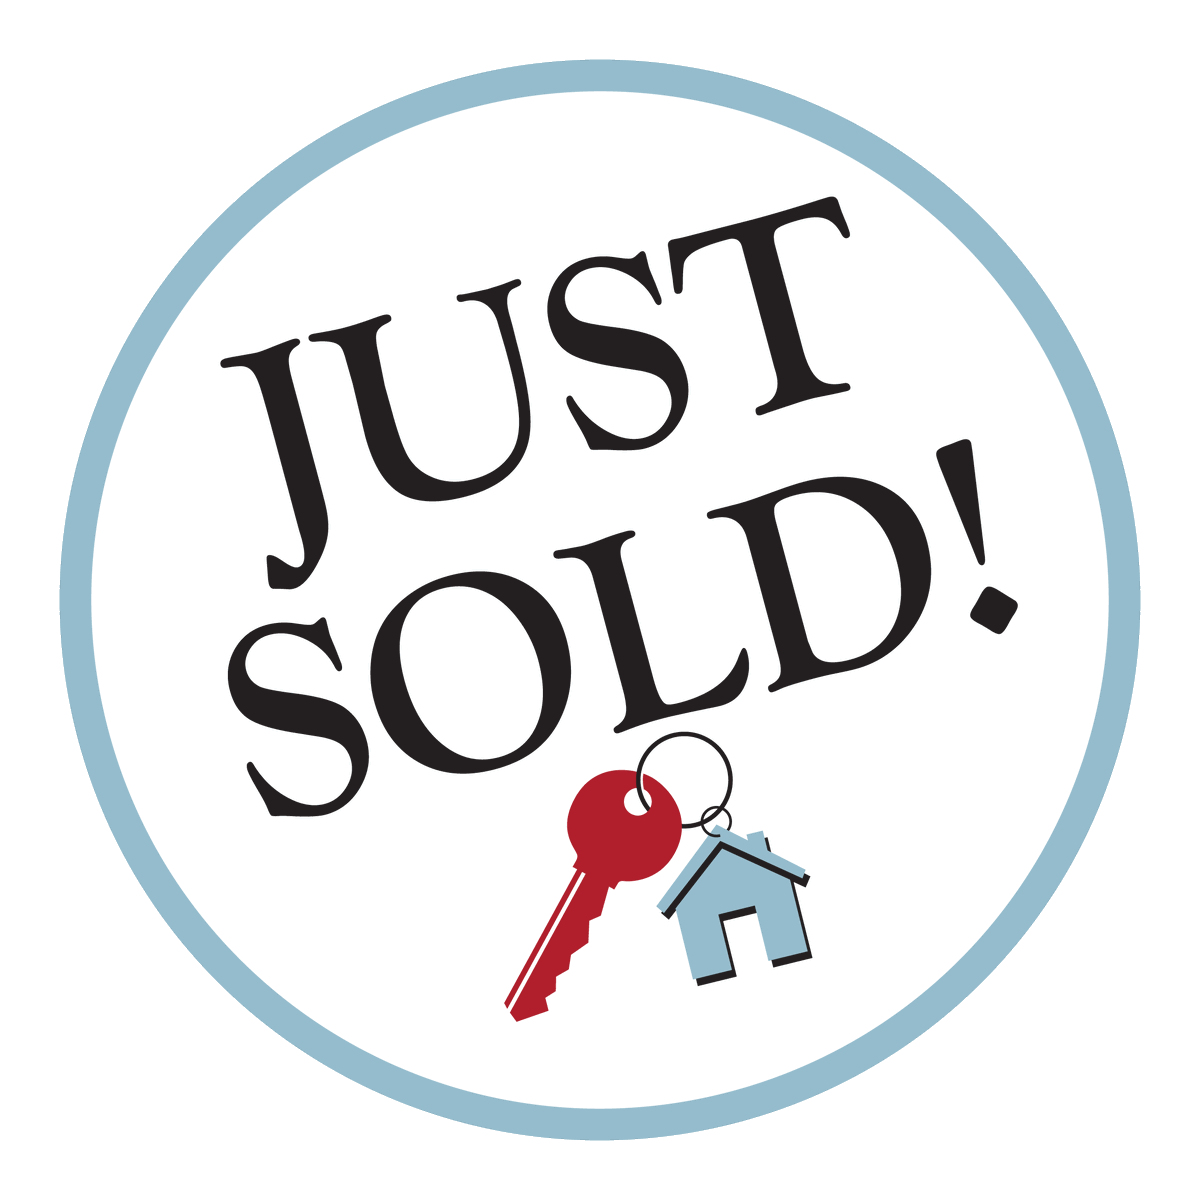 Yesterday was a fun day for our clients in Stonebriar Village.  We closed at 100% of asking price.   

#justsold #frisco #friscotx #friscorealtor #wesellstonebriar #thejudiwrightteam #makethewrightchoice #thewrightteamfortherighthome #stonebriarhomes #stonebriarvillage  #sold